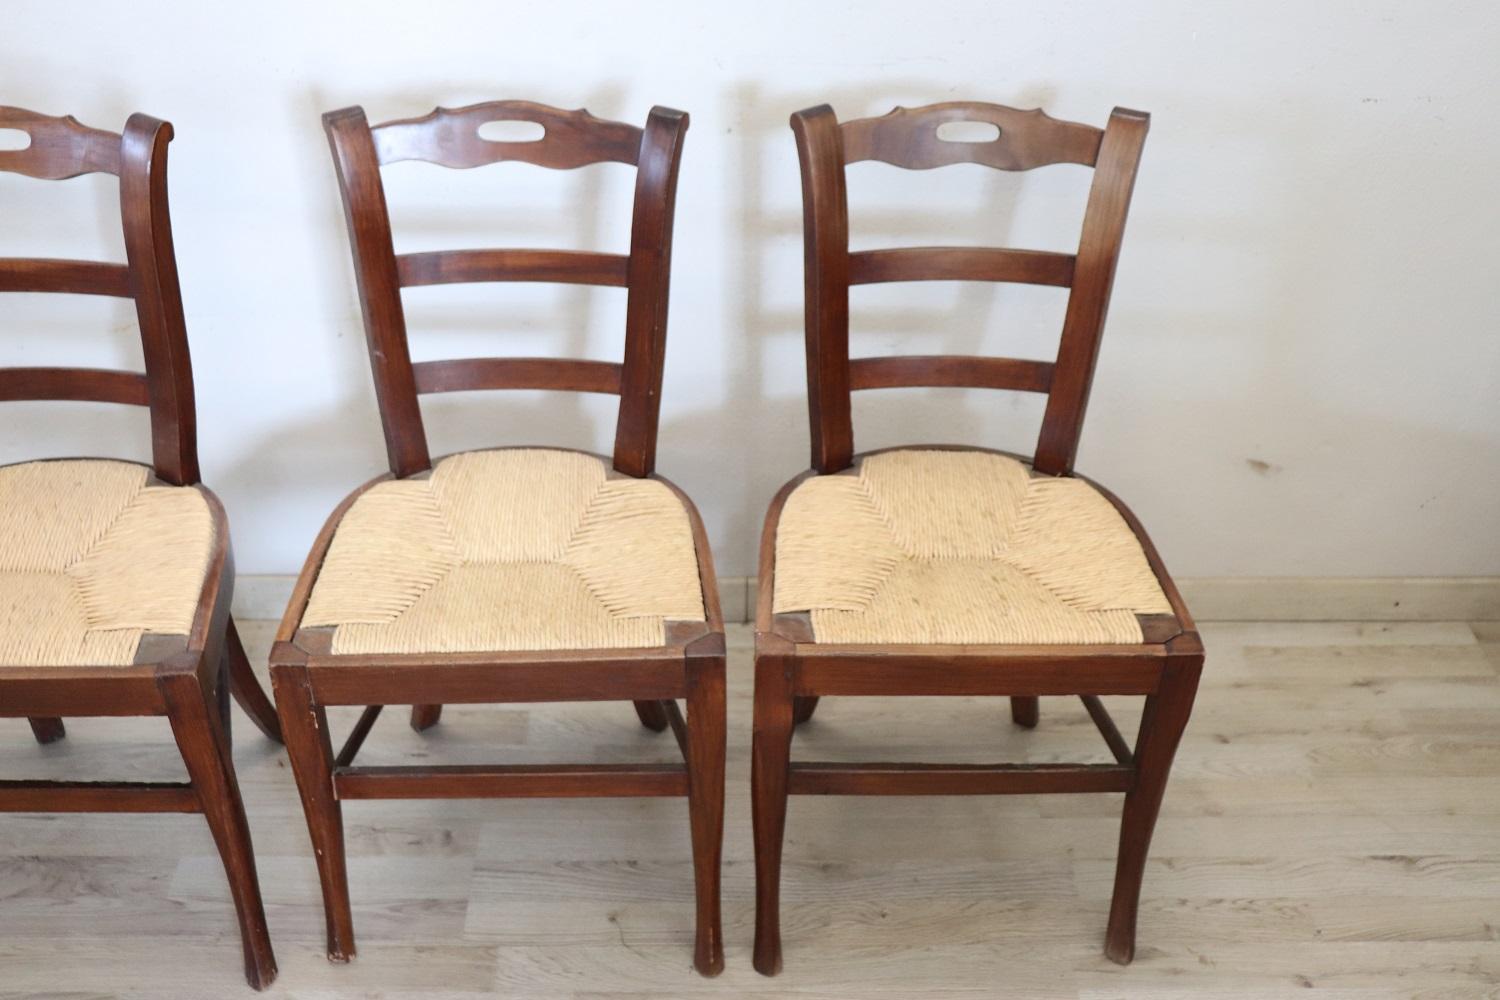 Italian 19th Century Set of Four Antique Chairs in Cherry Wood with Straw Seat For Sale